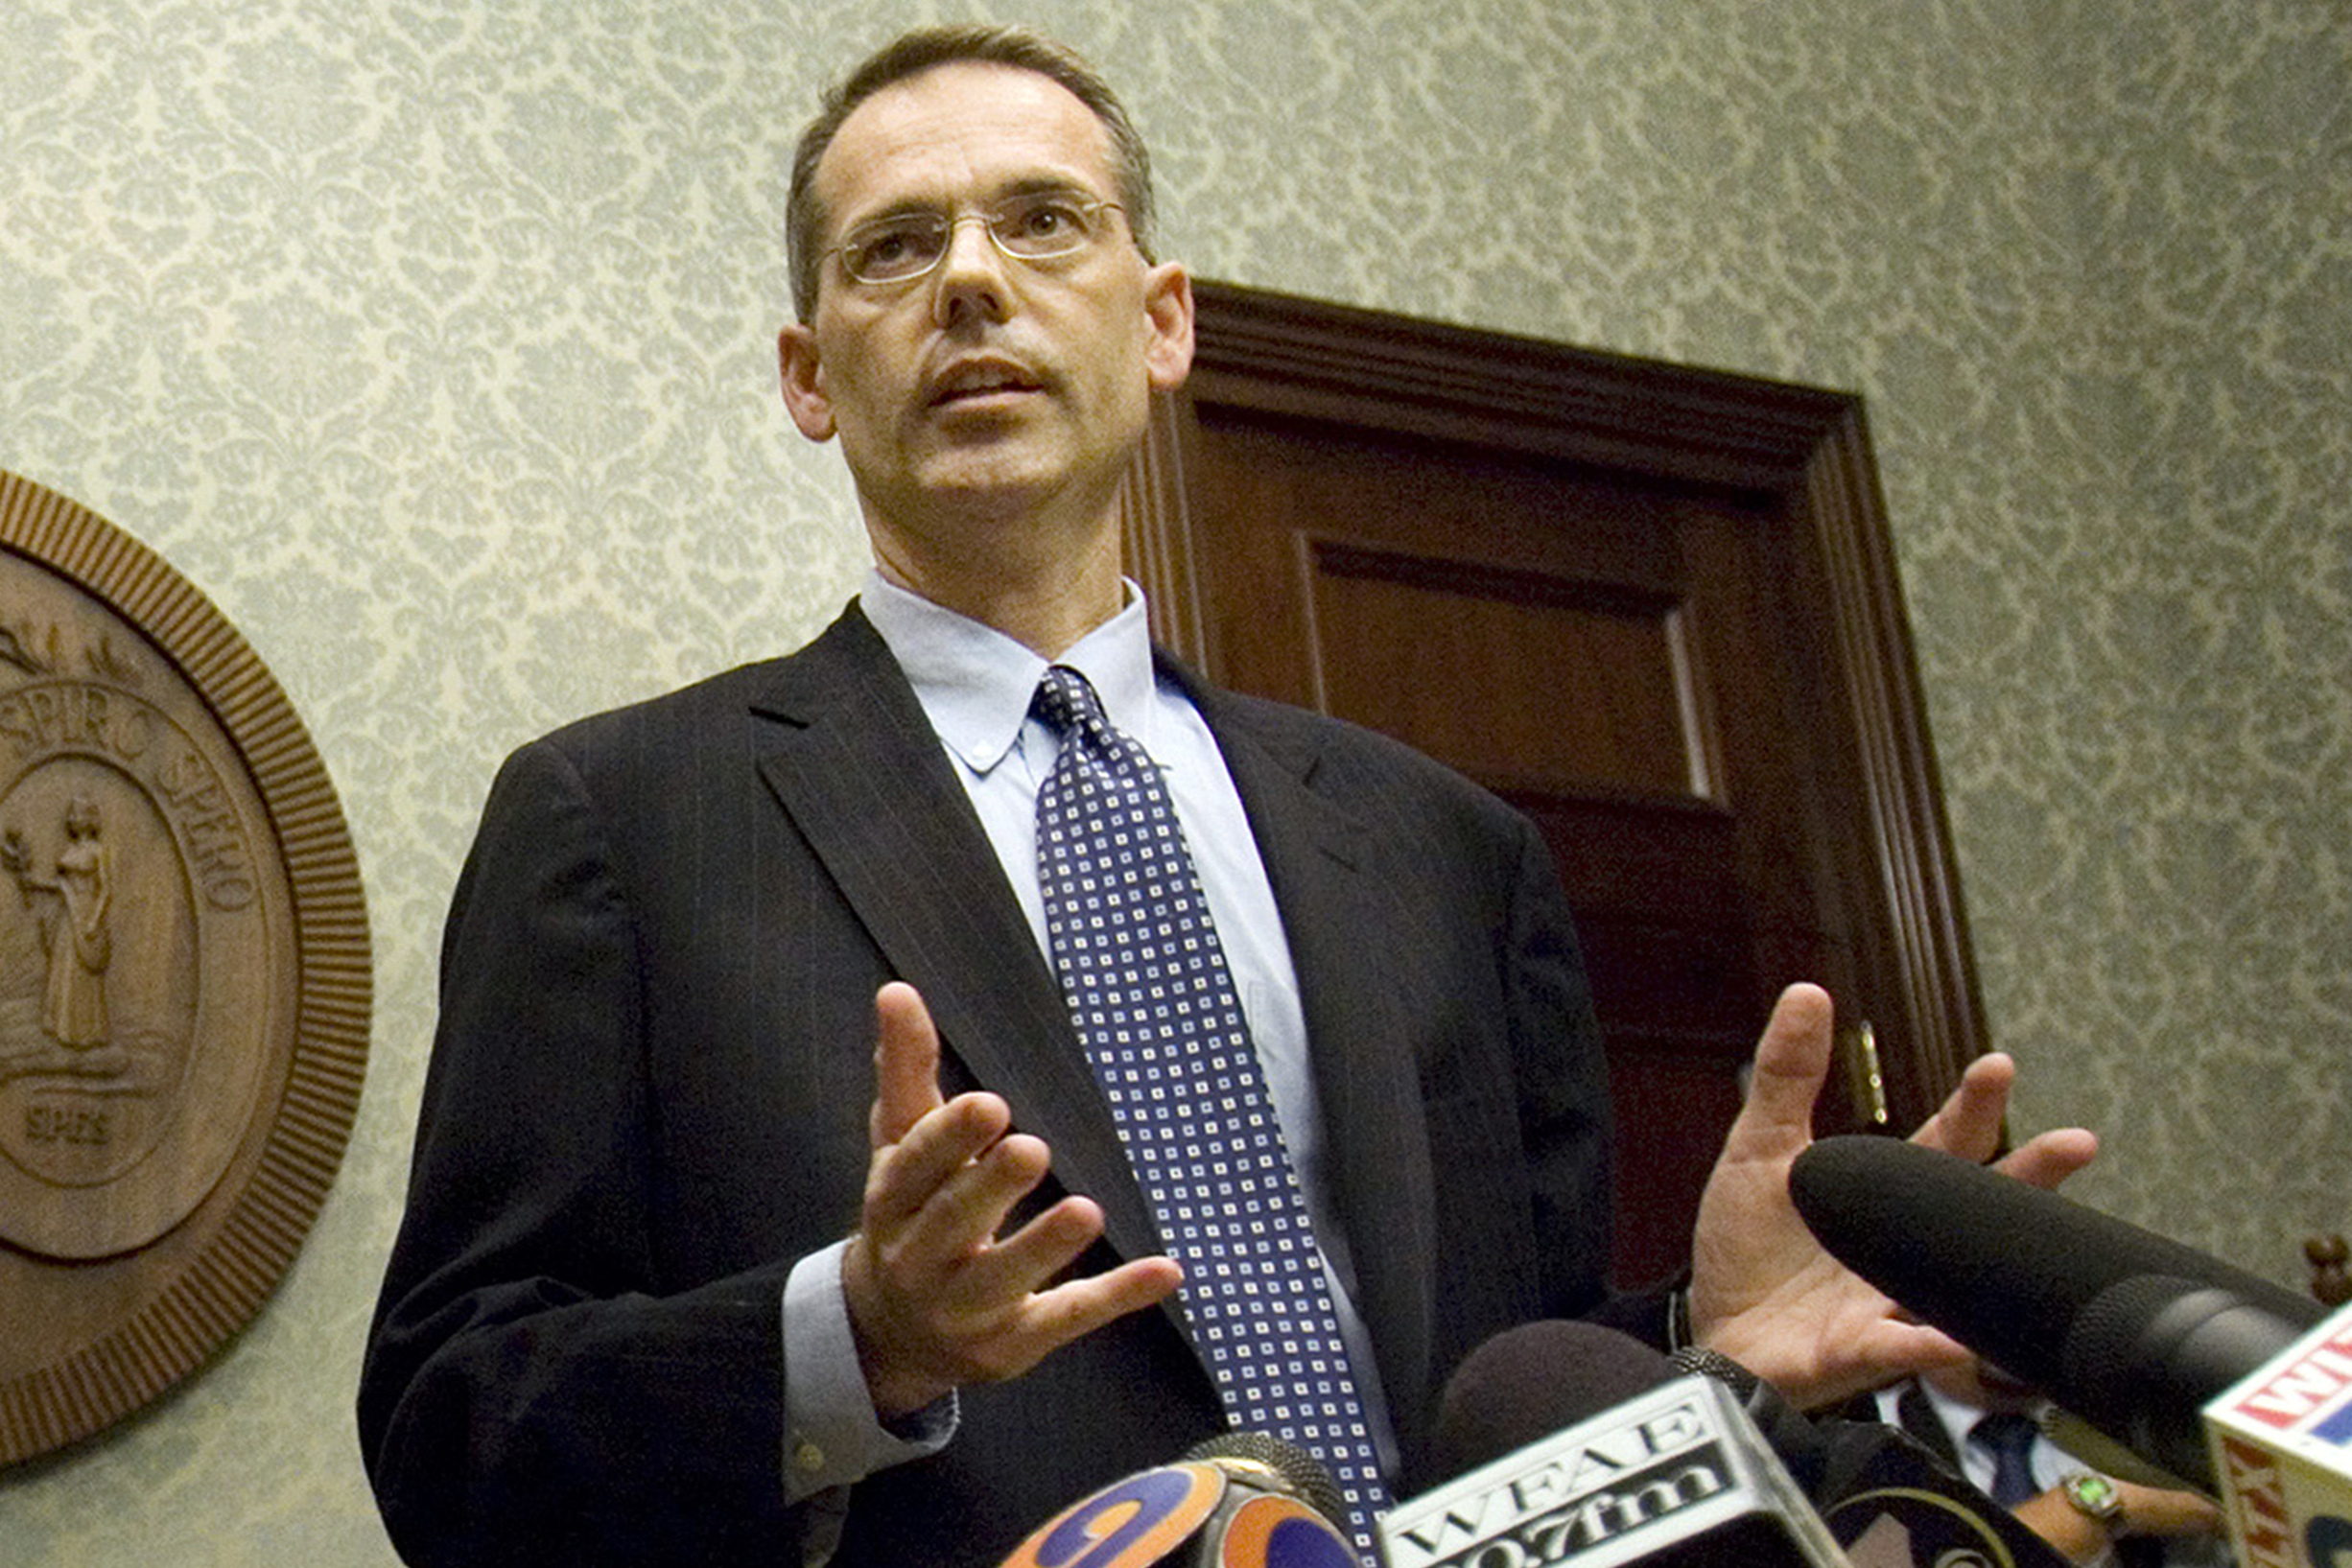 PHOTO: In this Sept. 10, 2009, file photo, attorney Butch Bowers speaks during a news conference at the Statehouse in Columbia, S.C. Bowers is used to defending public officials in ethics cases.